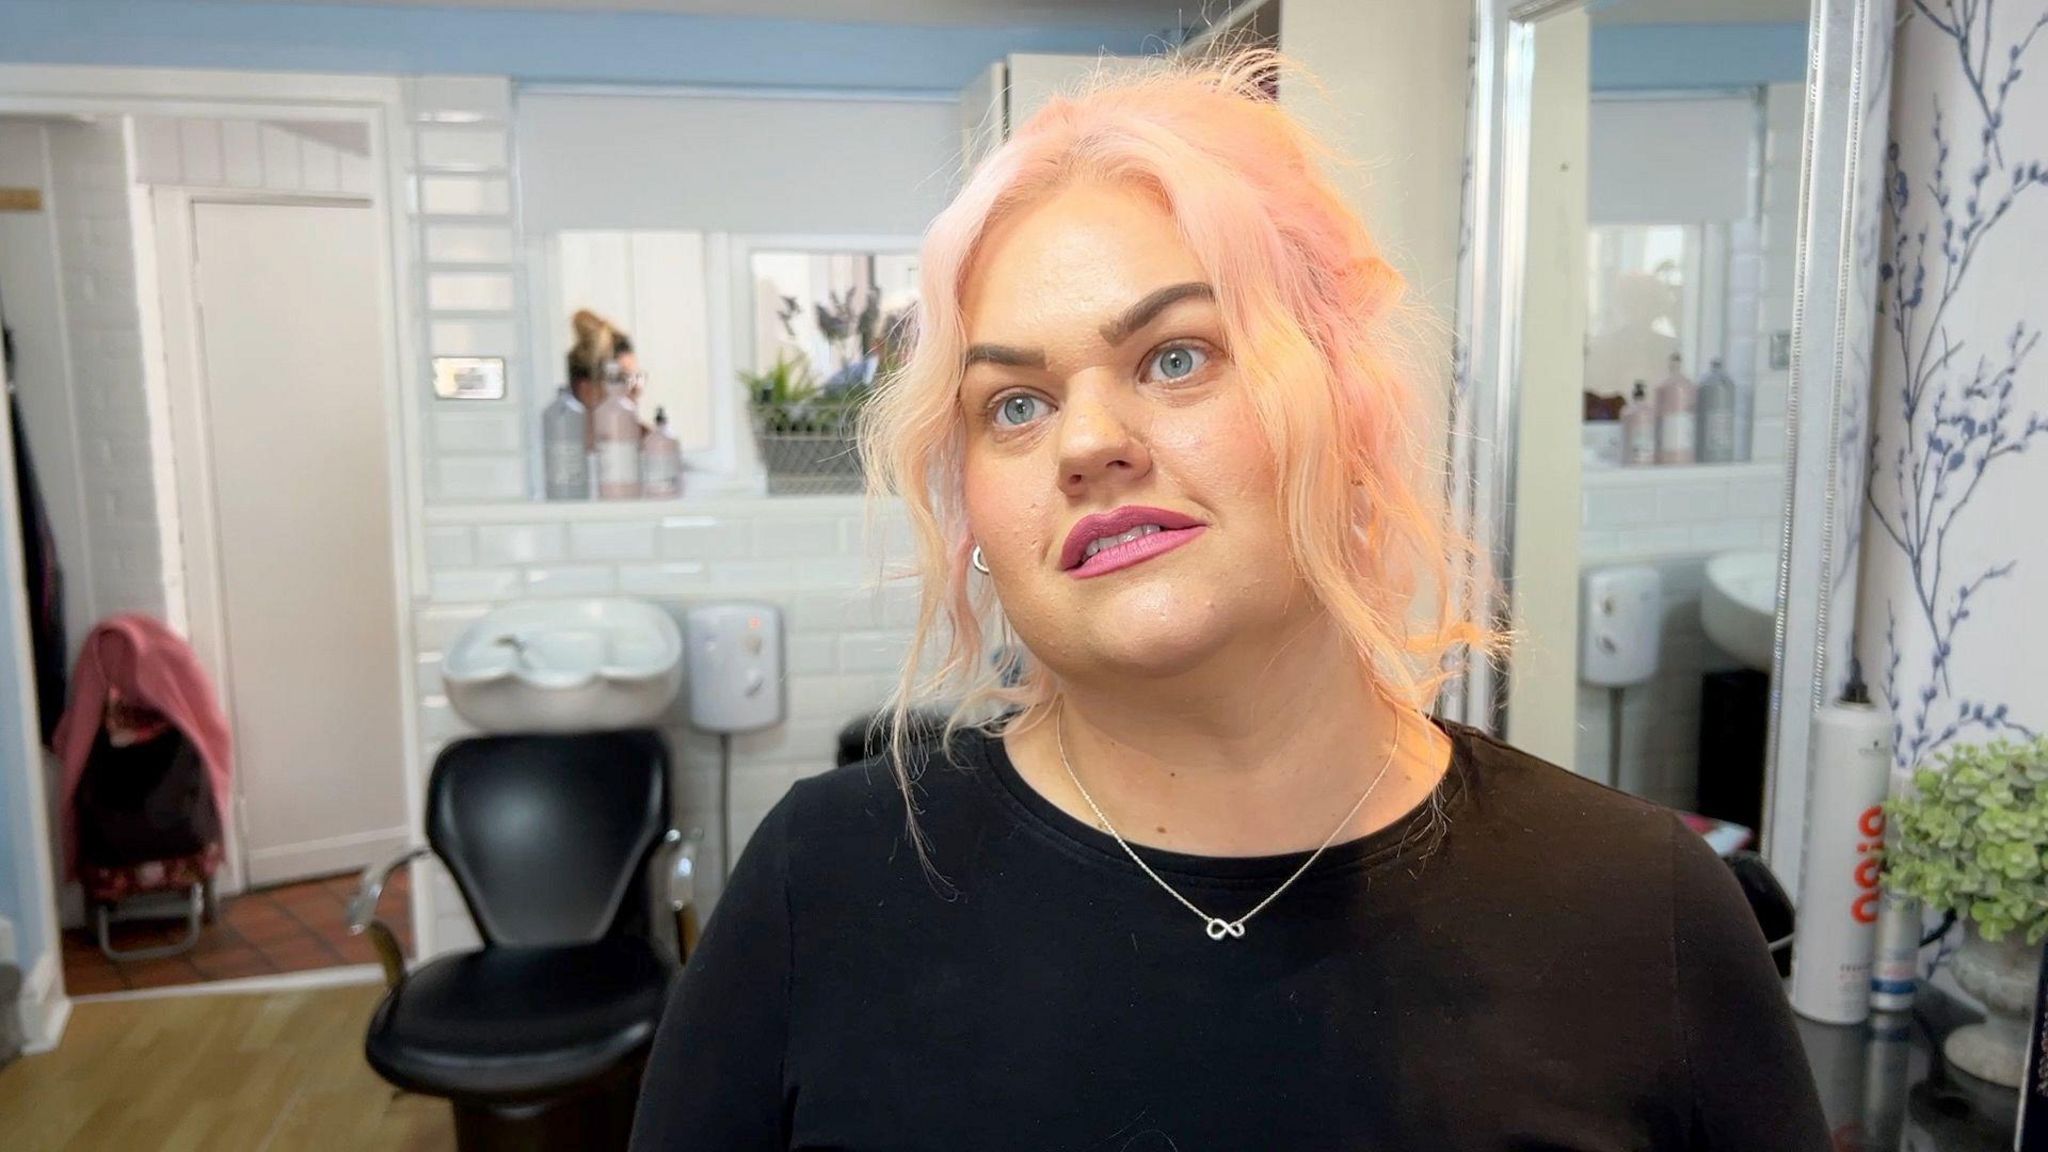 Kim Dudley stood in a hair salon with a chair and a basin behind her. She has blonde shoulder length hair with pink highlights and is wearing a black top with a thin silver necklace